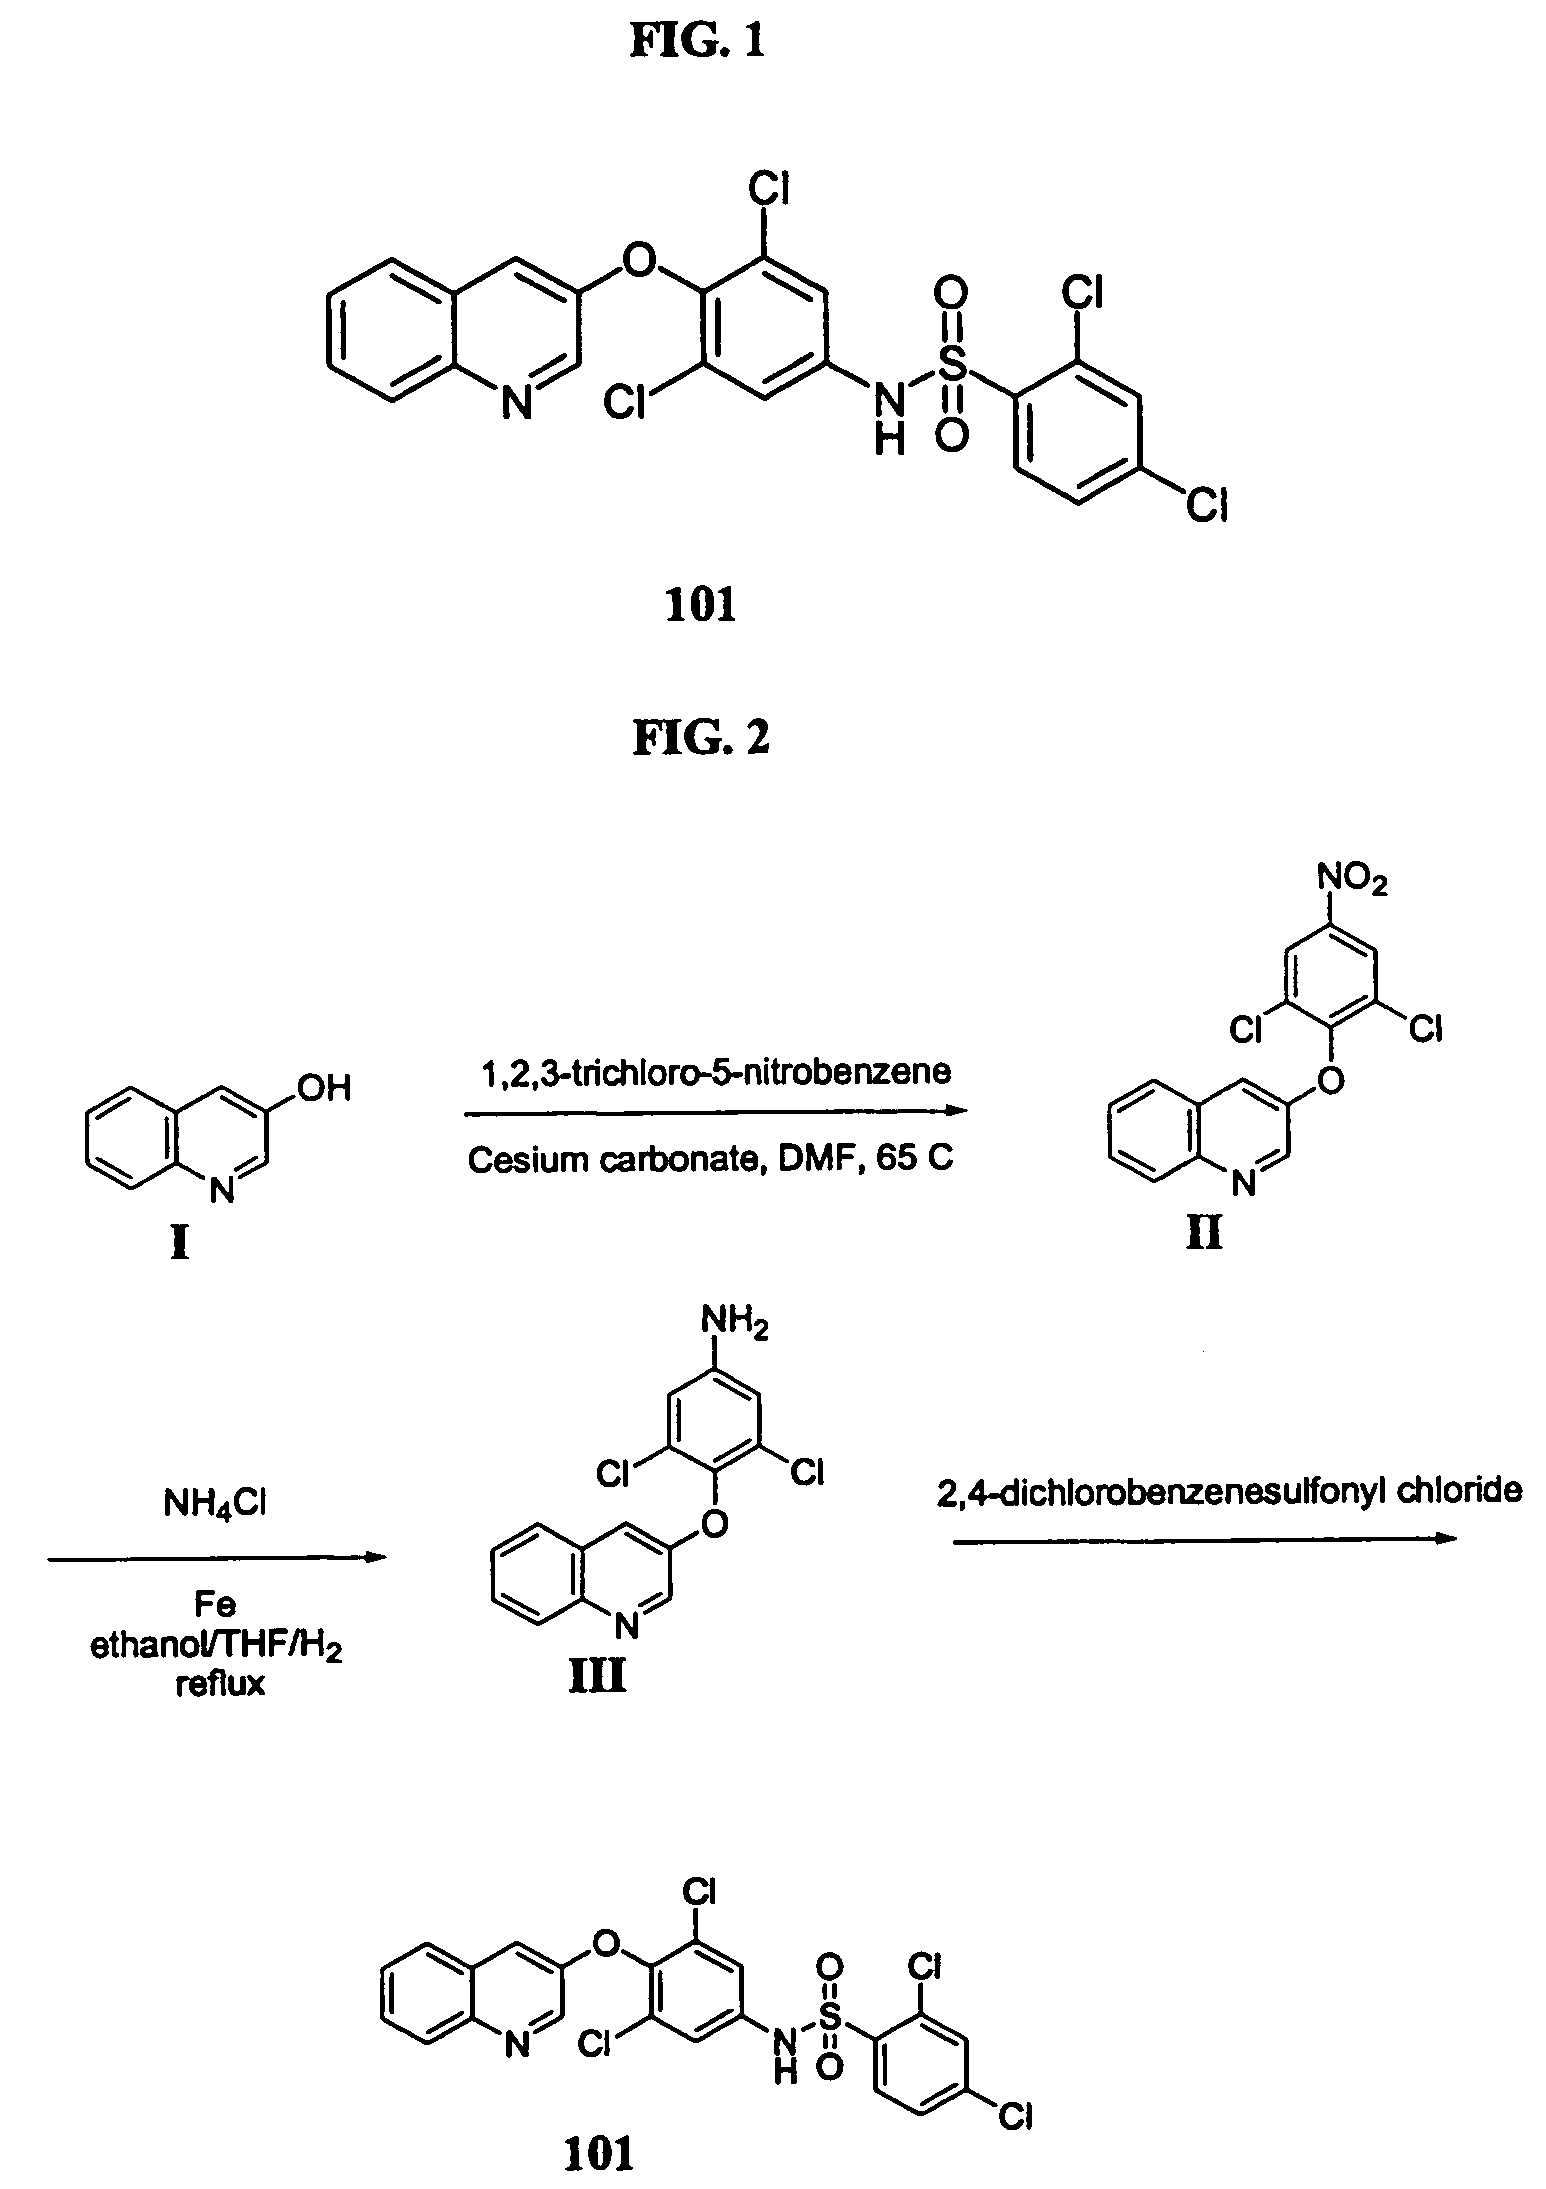 Salts and polymorphs of a potent antidiabetic compound